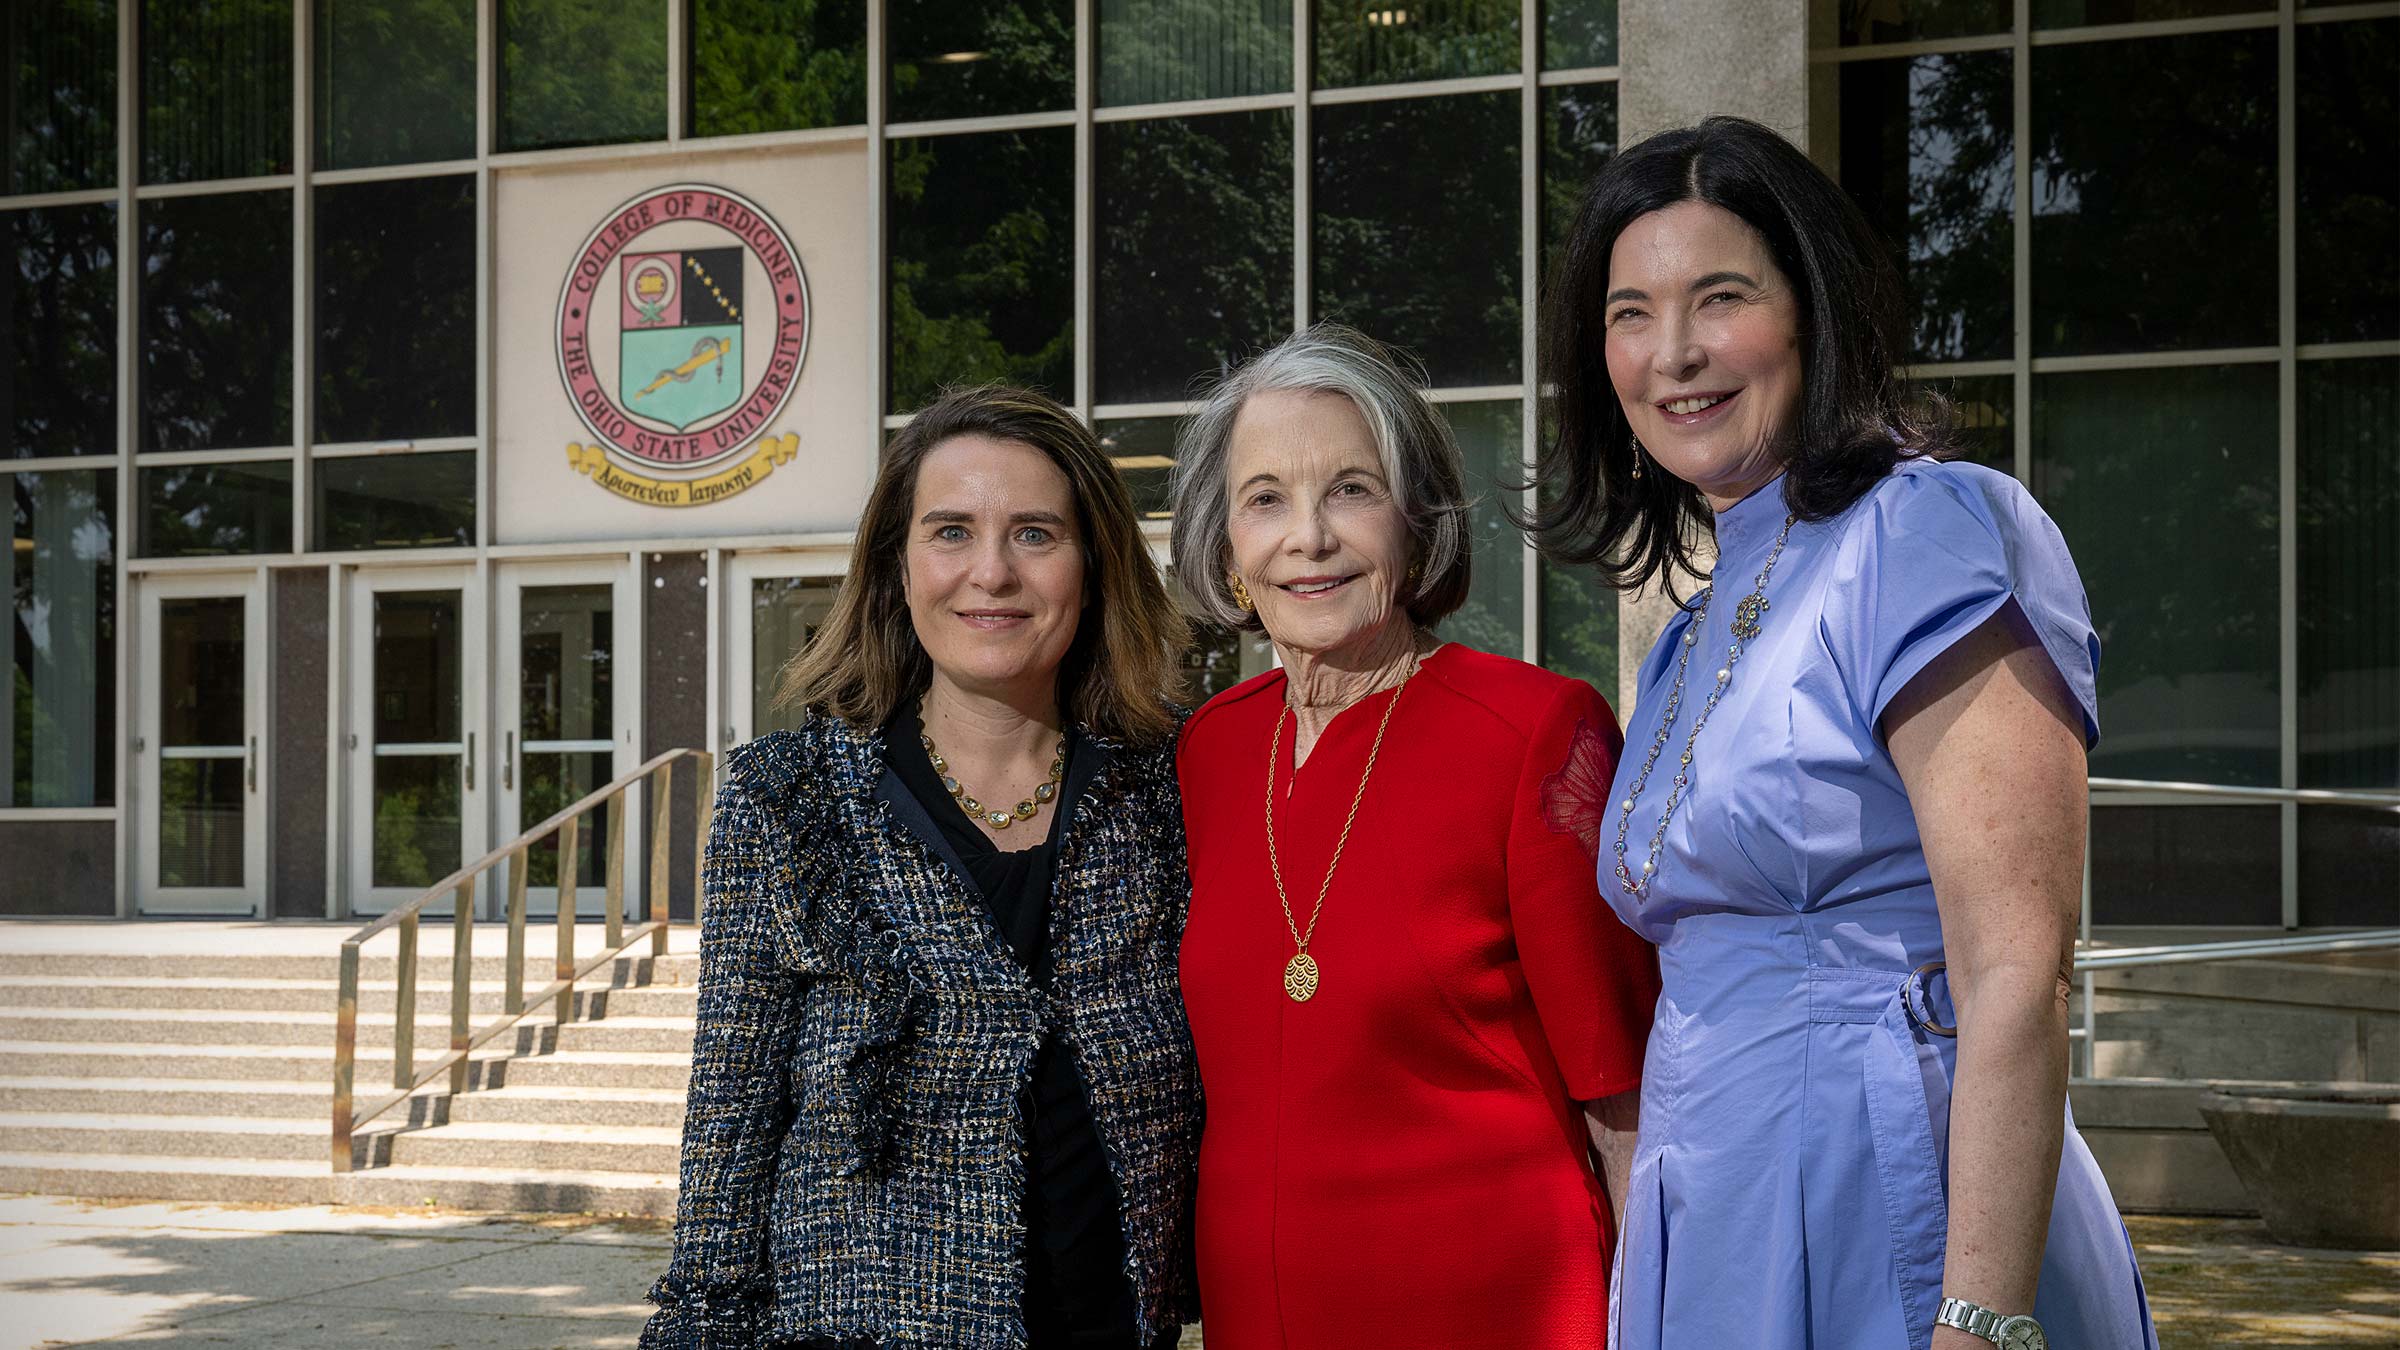 Dr. Gur, Sarah “Sally” Ross Soter and Sarah Kay standing in front of Ohio State's Meiling Hall